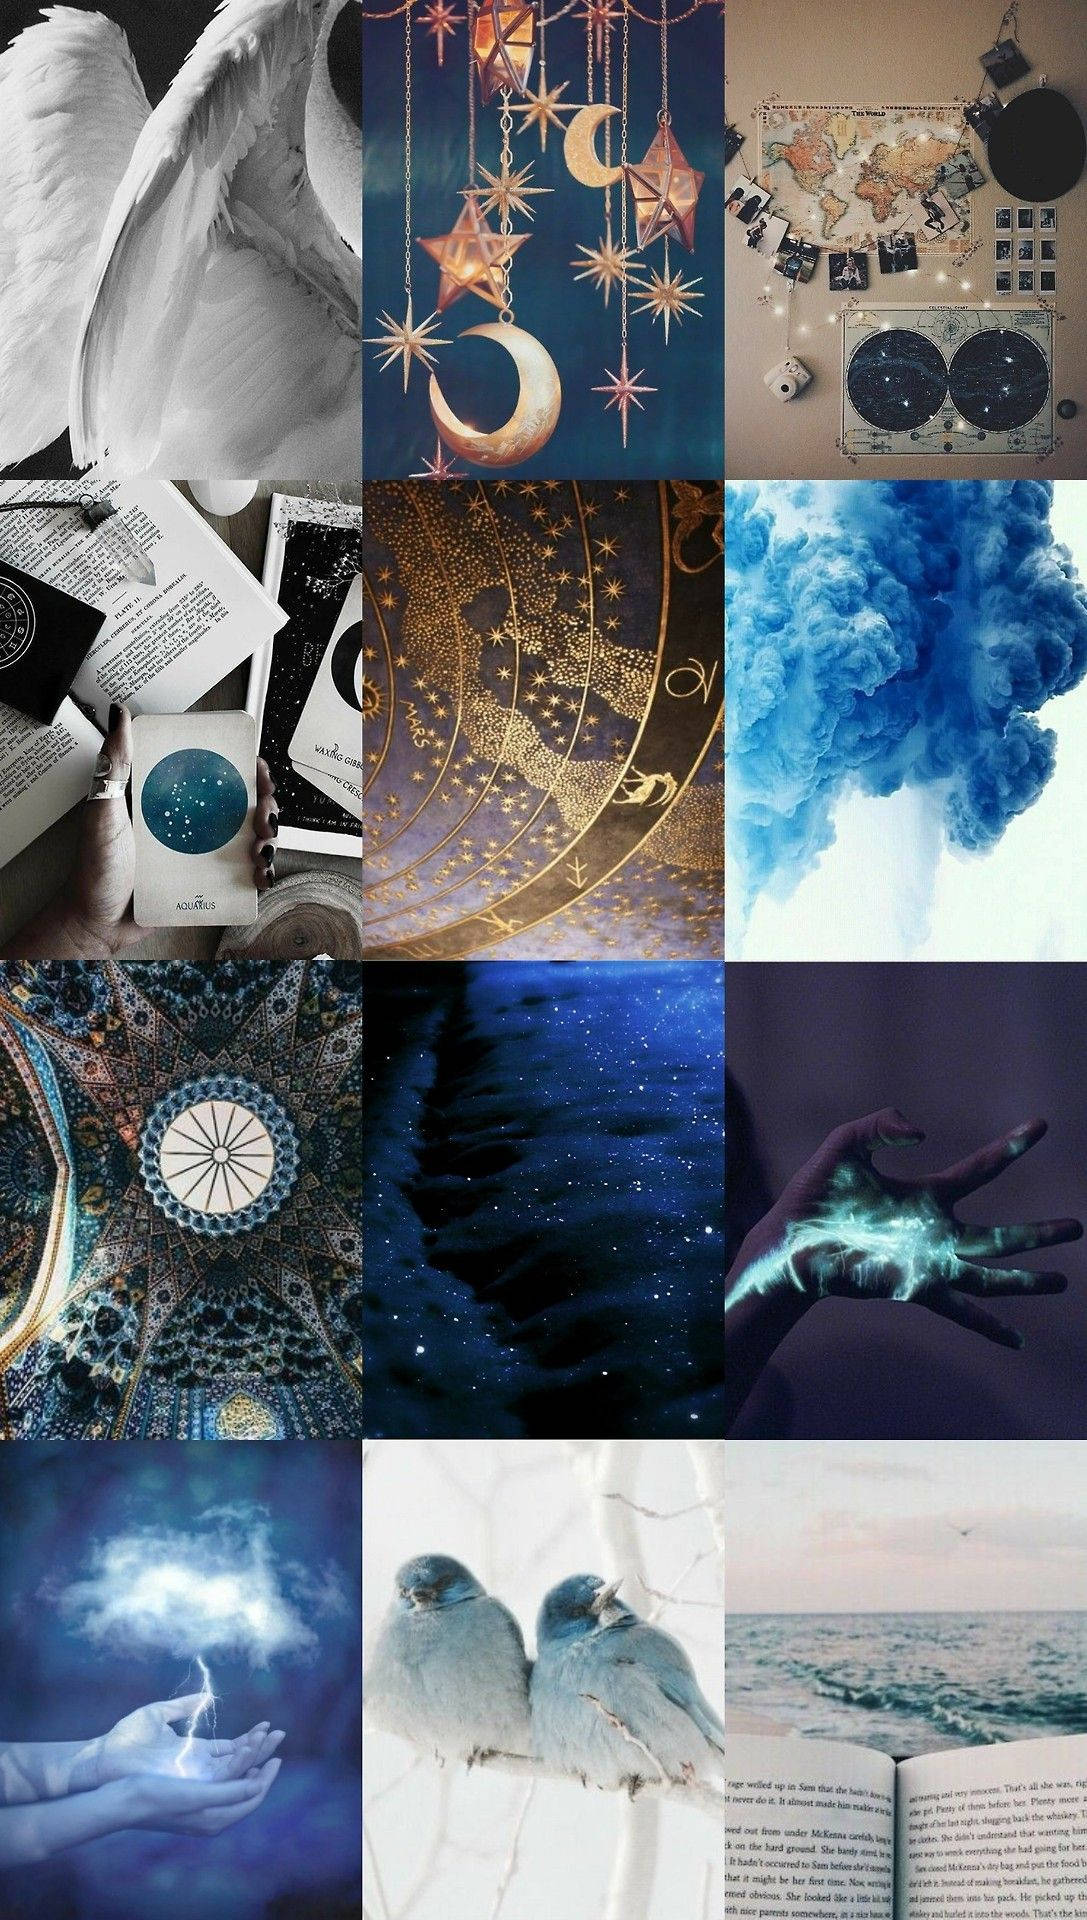 Aesthetic collage of blue and white images including the moon, stars, and a book. - Witch, magic